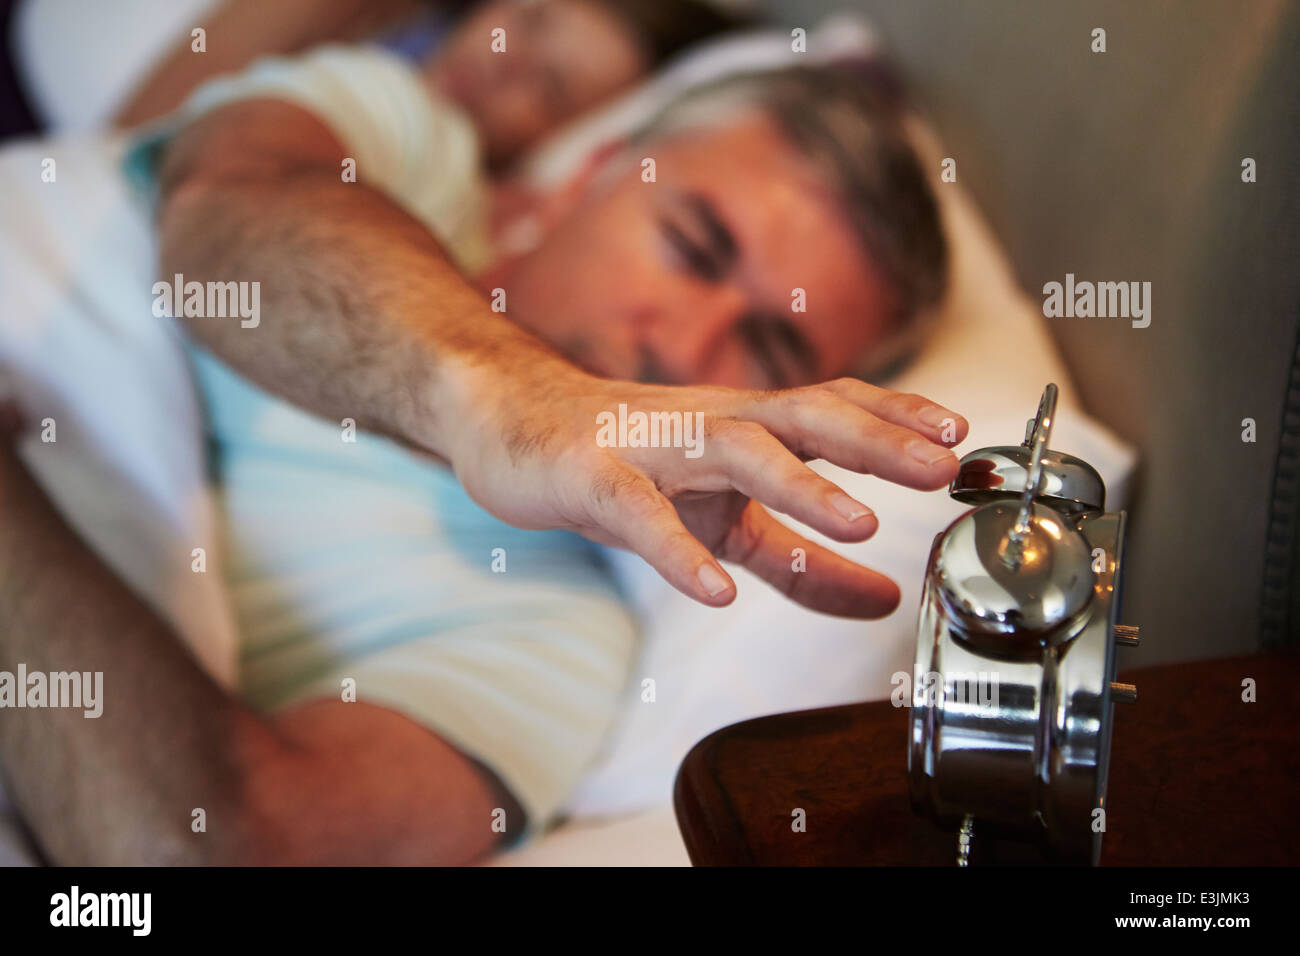 Couple In Bed With Man Reaching To Switch Off Alarm Clock Stock Photo